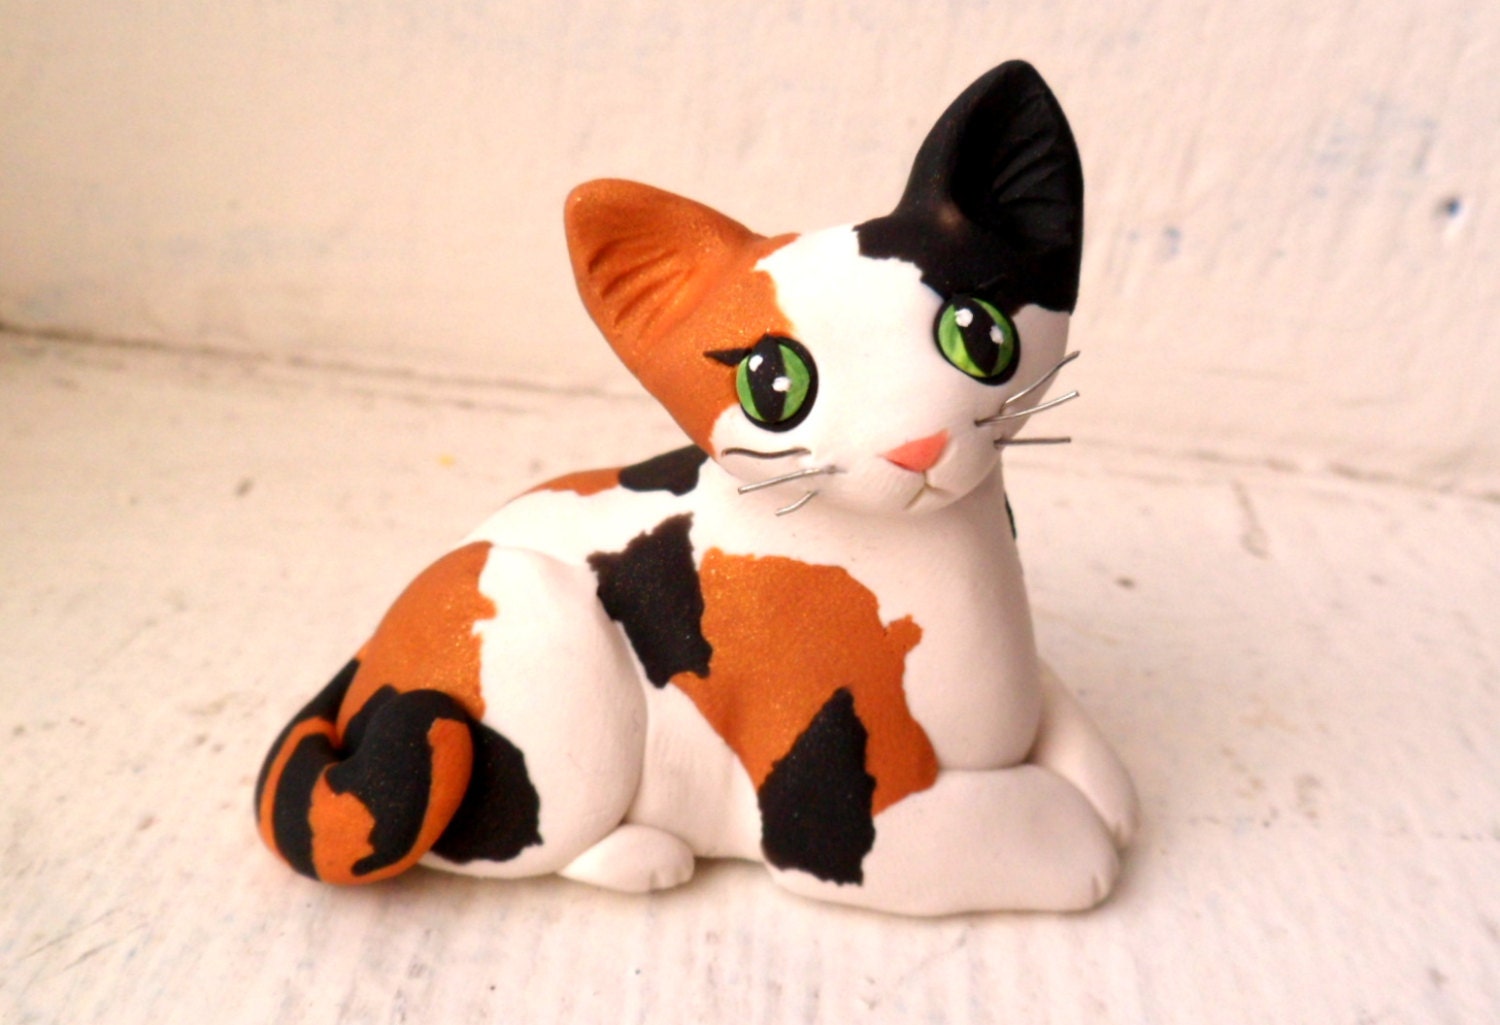 Calico Cat  Sculpture  Polymer Clay  Mini Hand sculpted by Raquel